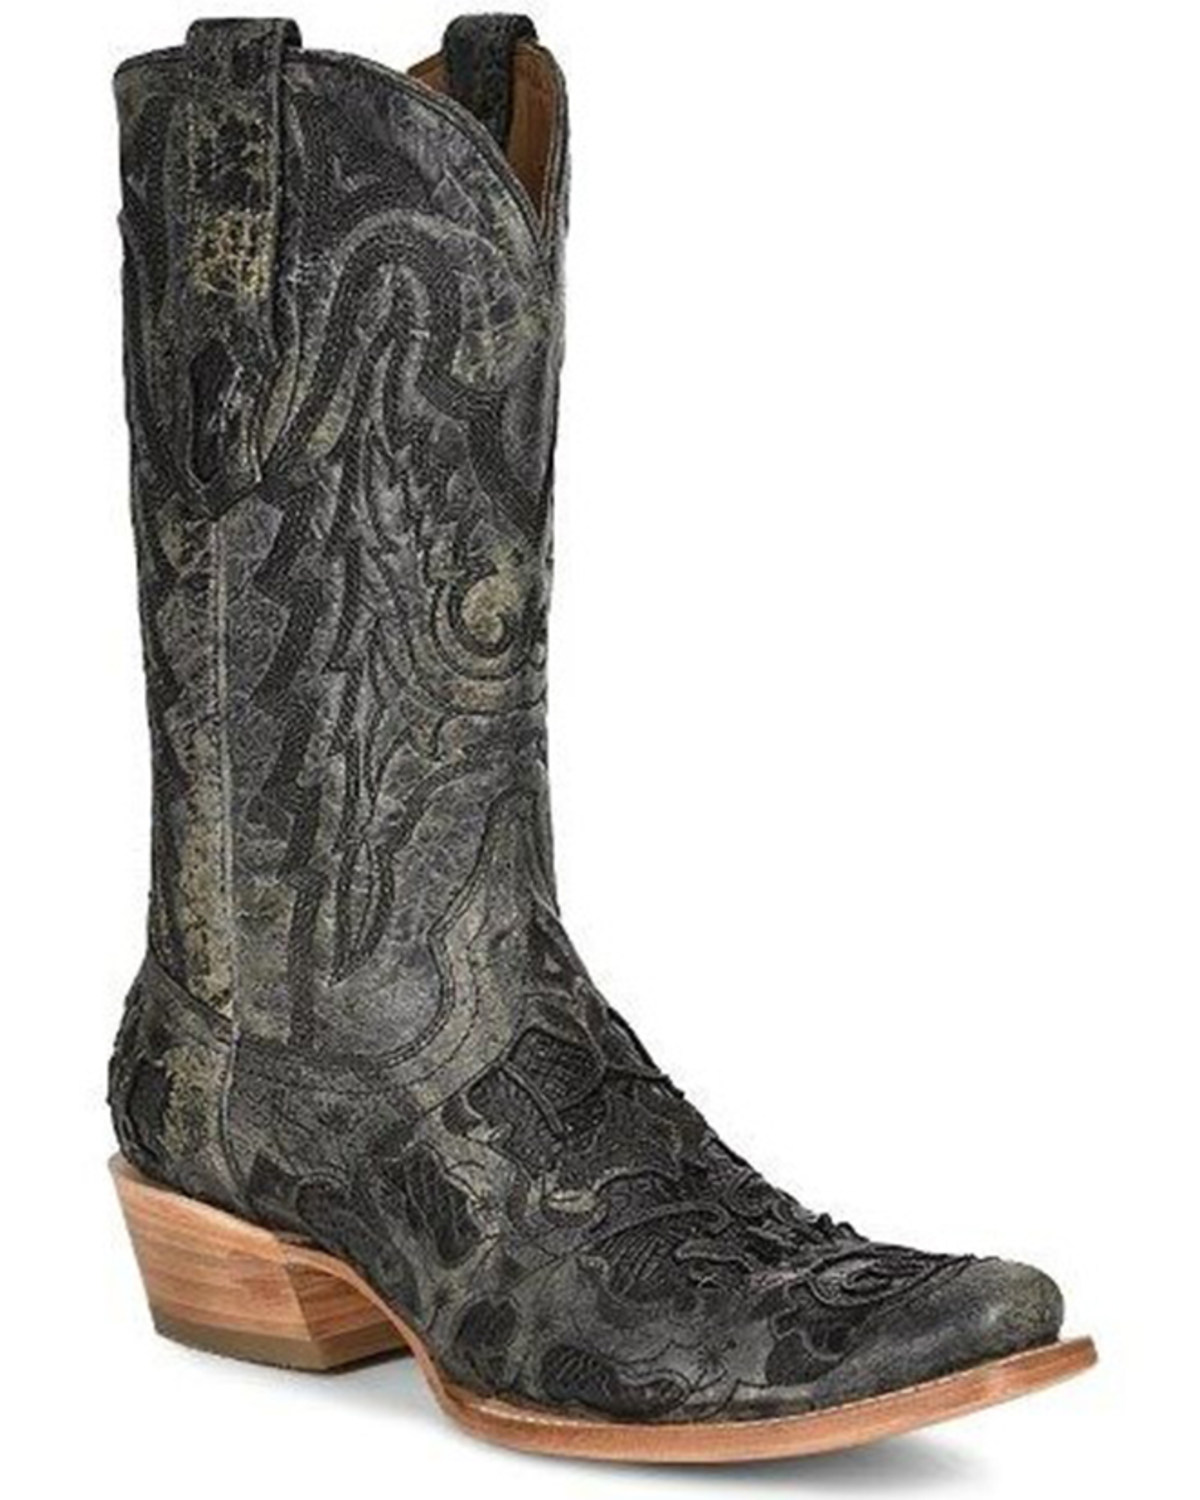 Corral Men's Exotic Alligator Western Boots